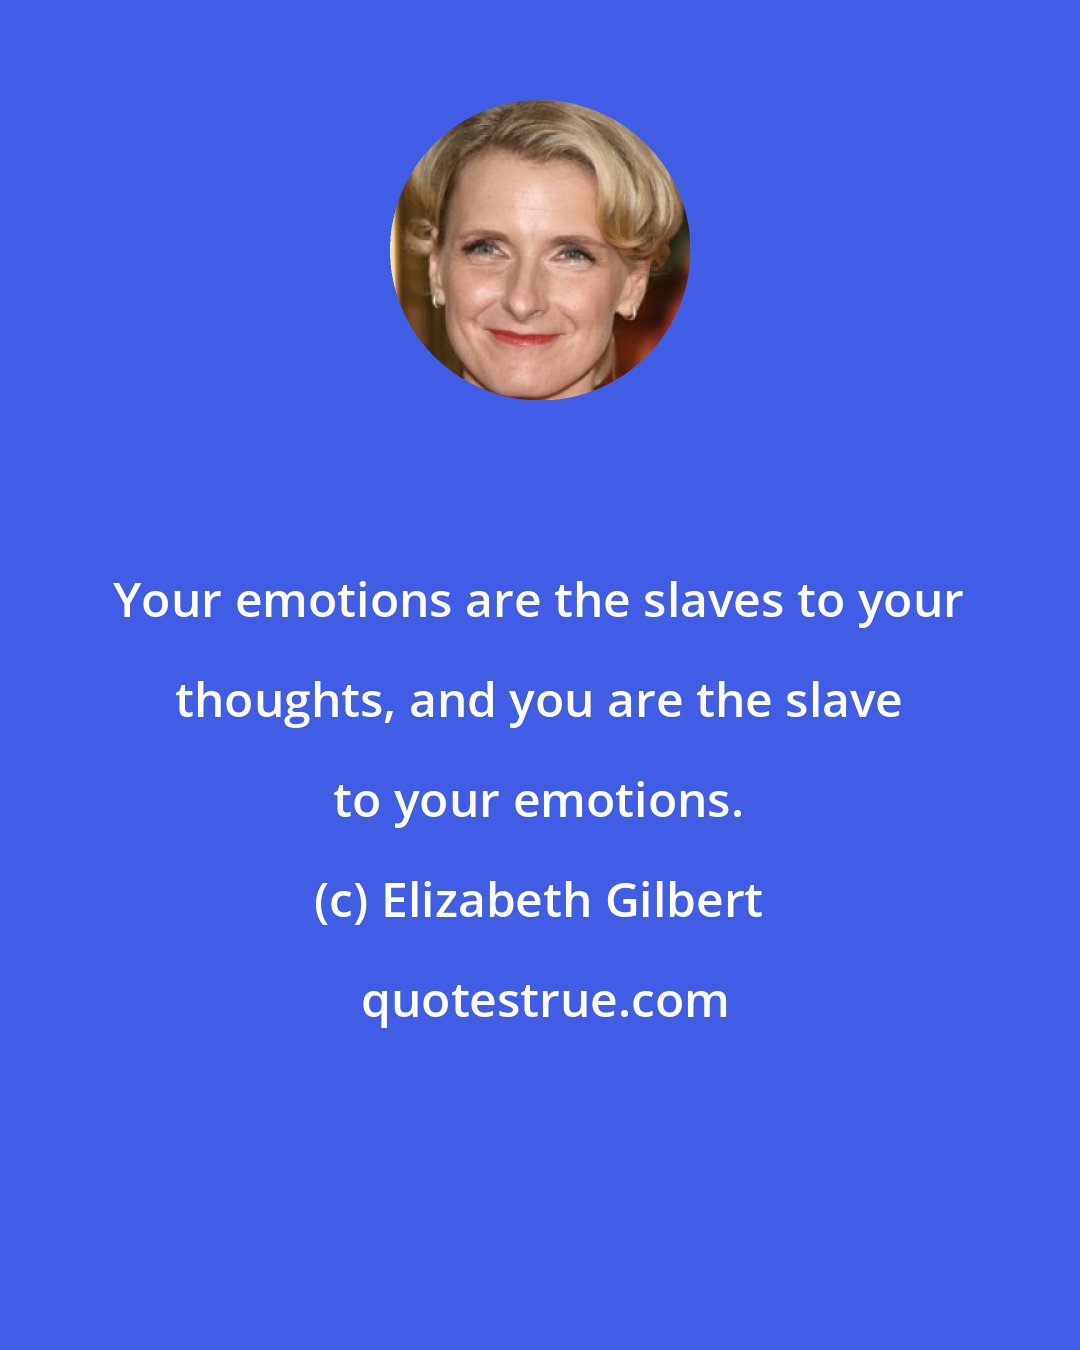 Elizabeth Gilbert: Your emotions are the slaves to your thoughts, and you are the slave to your emotions.